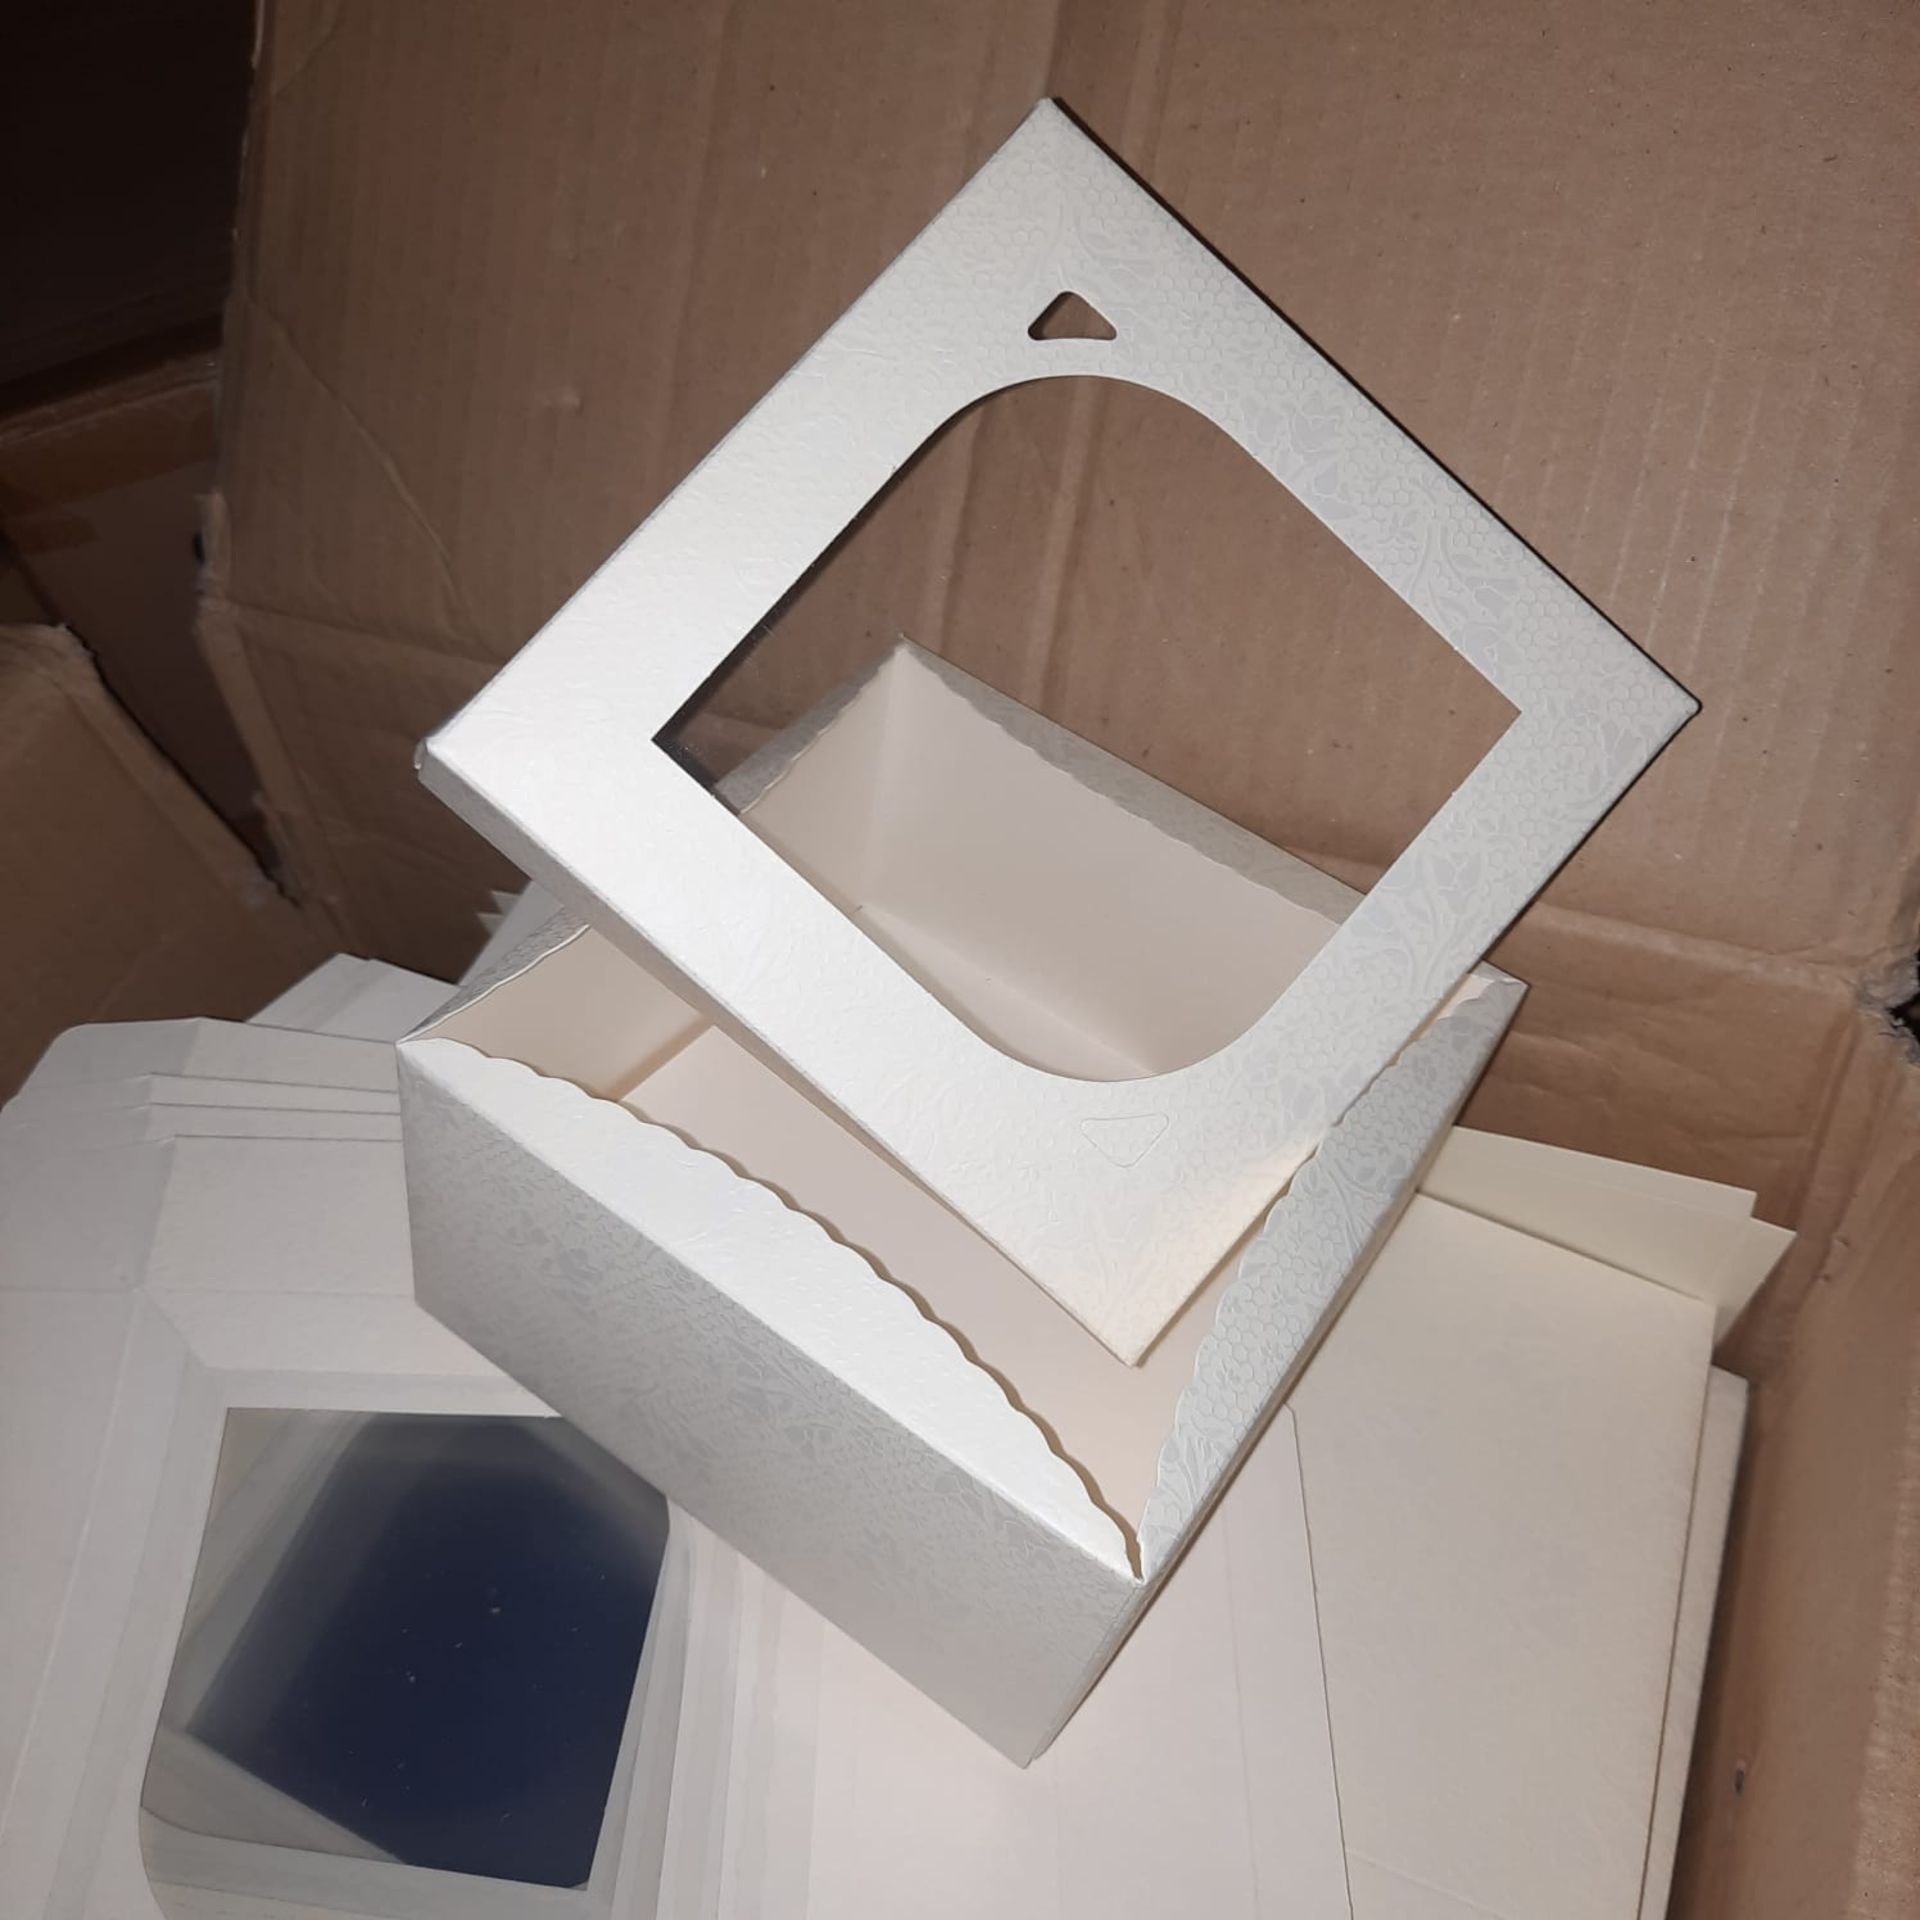 X 45 CREAM PAPER BOXES WITH CLEAR WINDOW - NEW SALEROOM ONMID OF ROW (C).